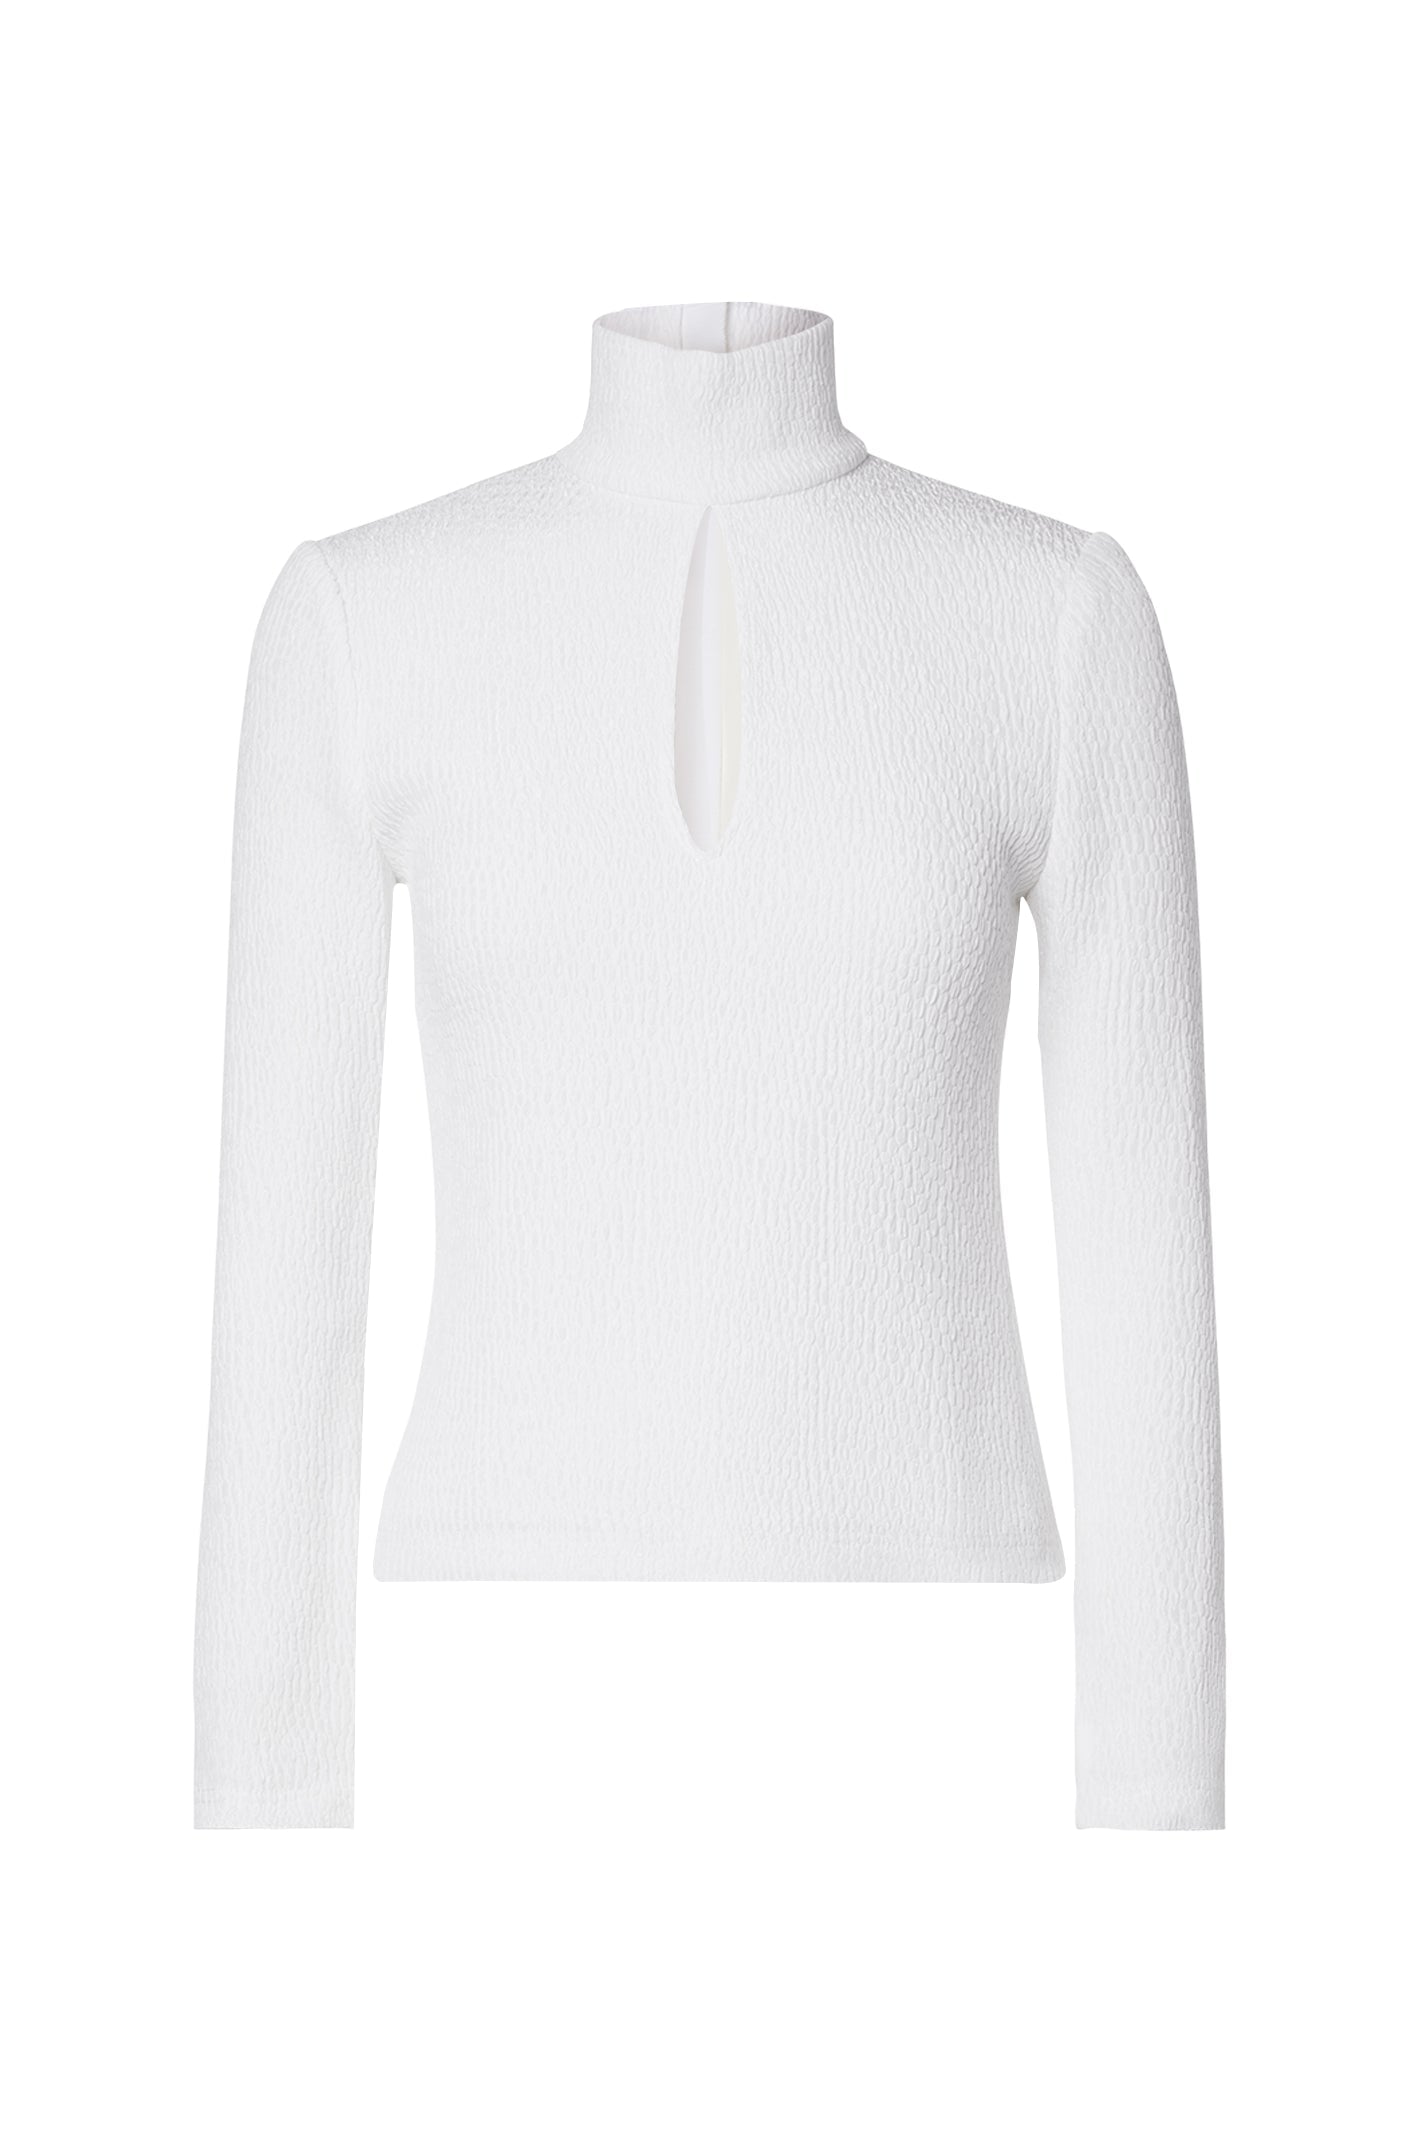 SRETCH REPTILE LONG SLEEVE TOP - WHITE